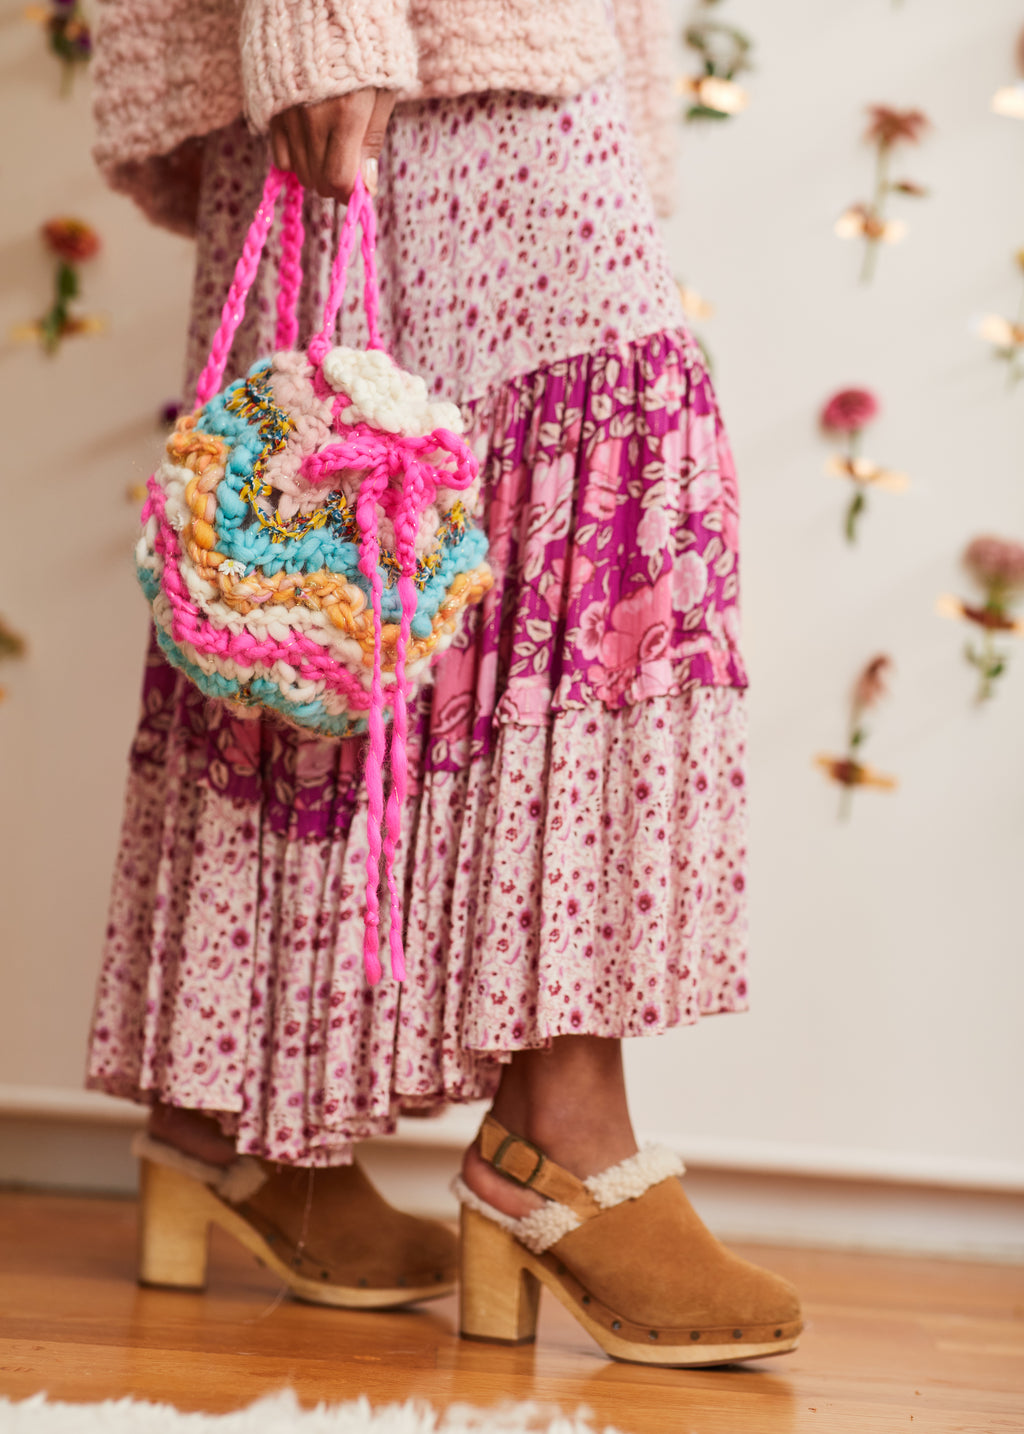 Carry the Sunshine sack by the crocheted straps and tie it shut with a top closure.